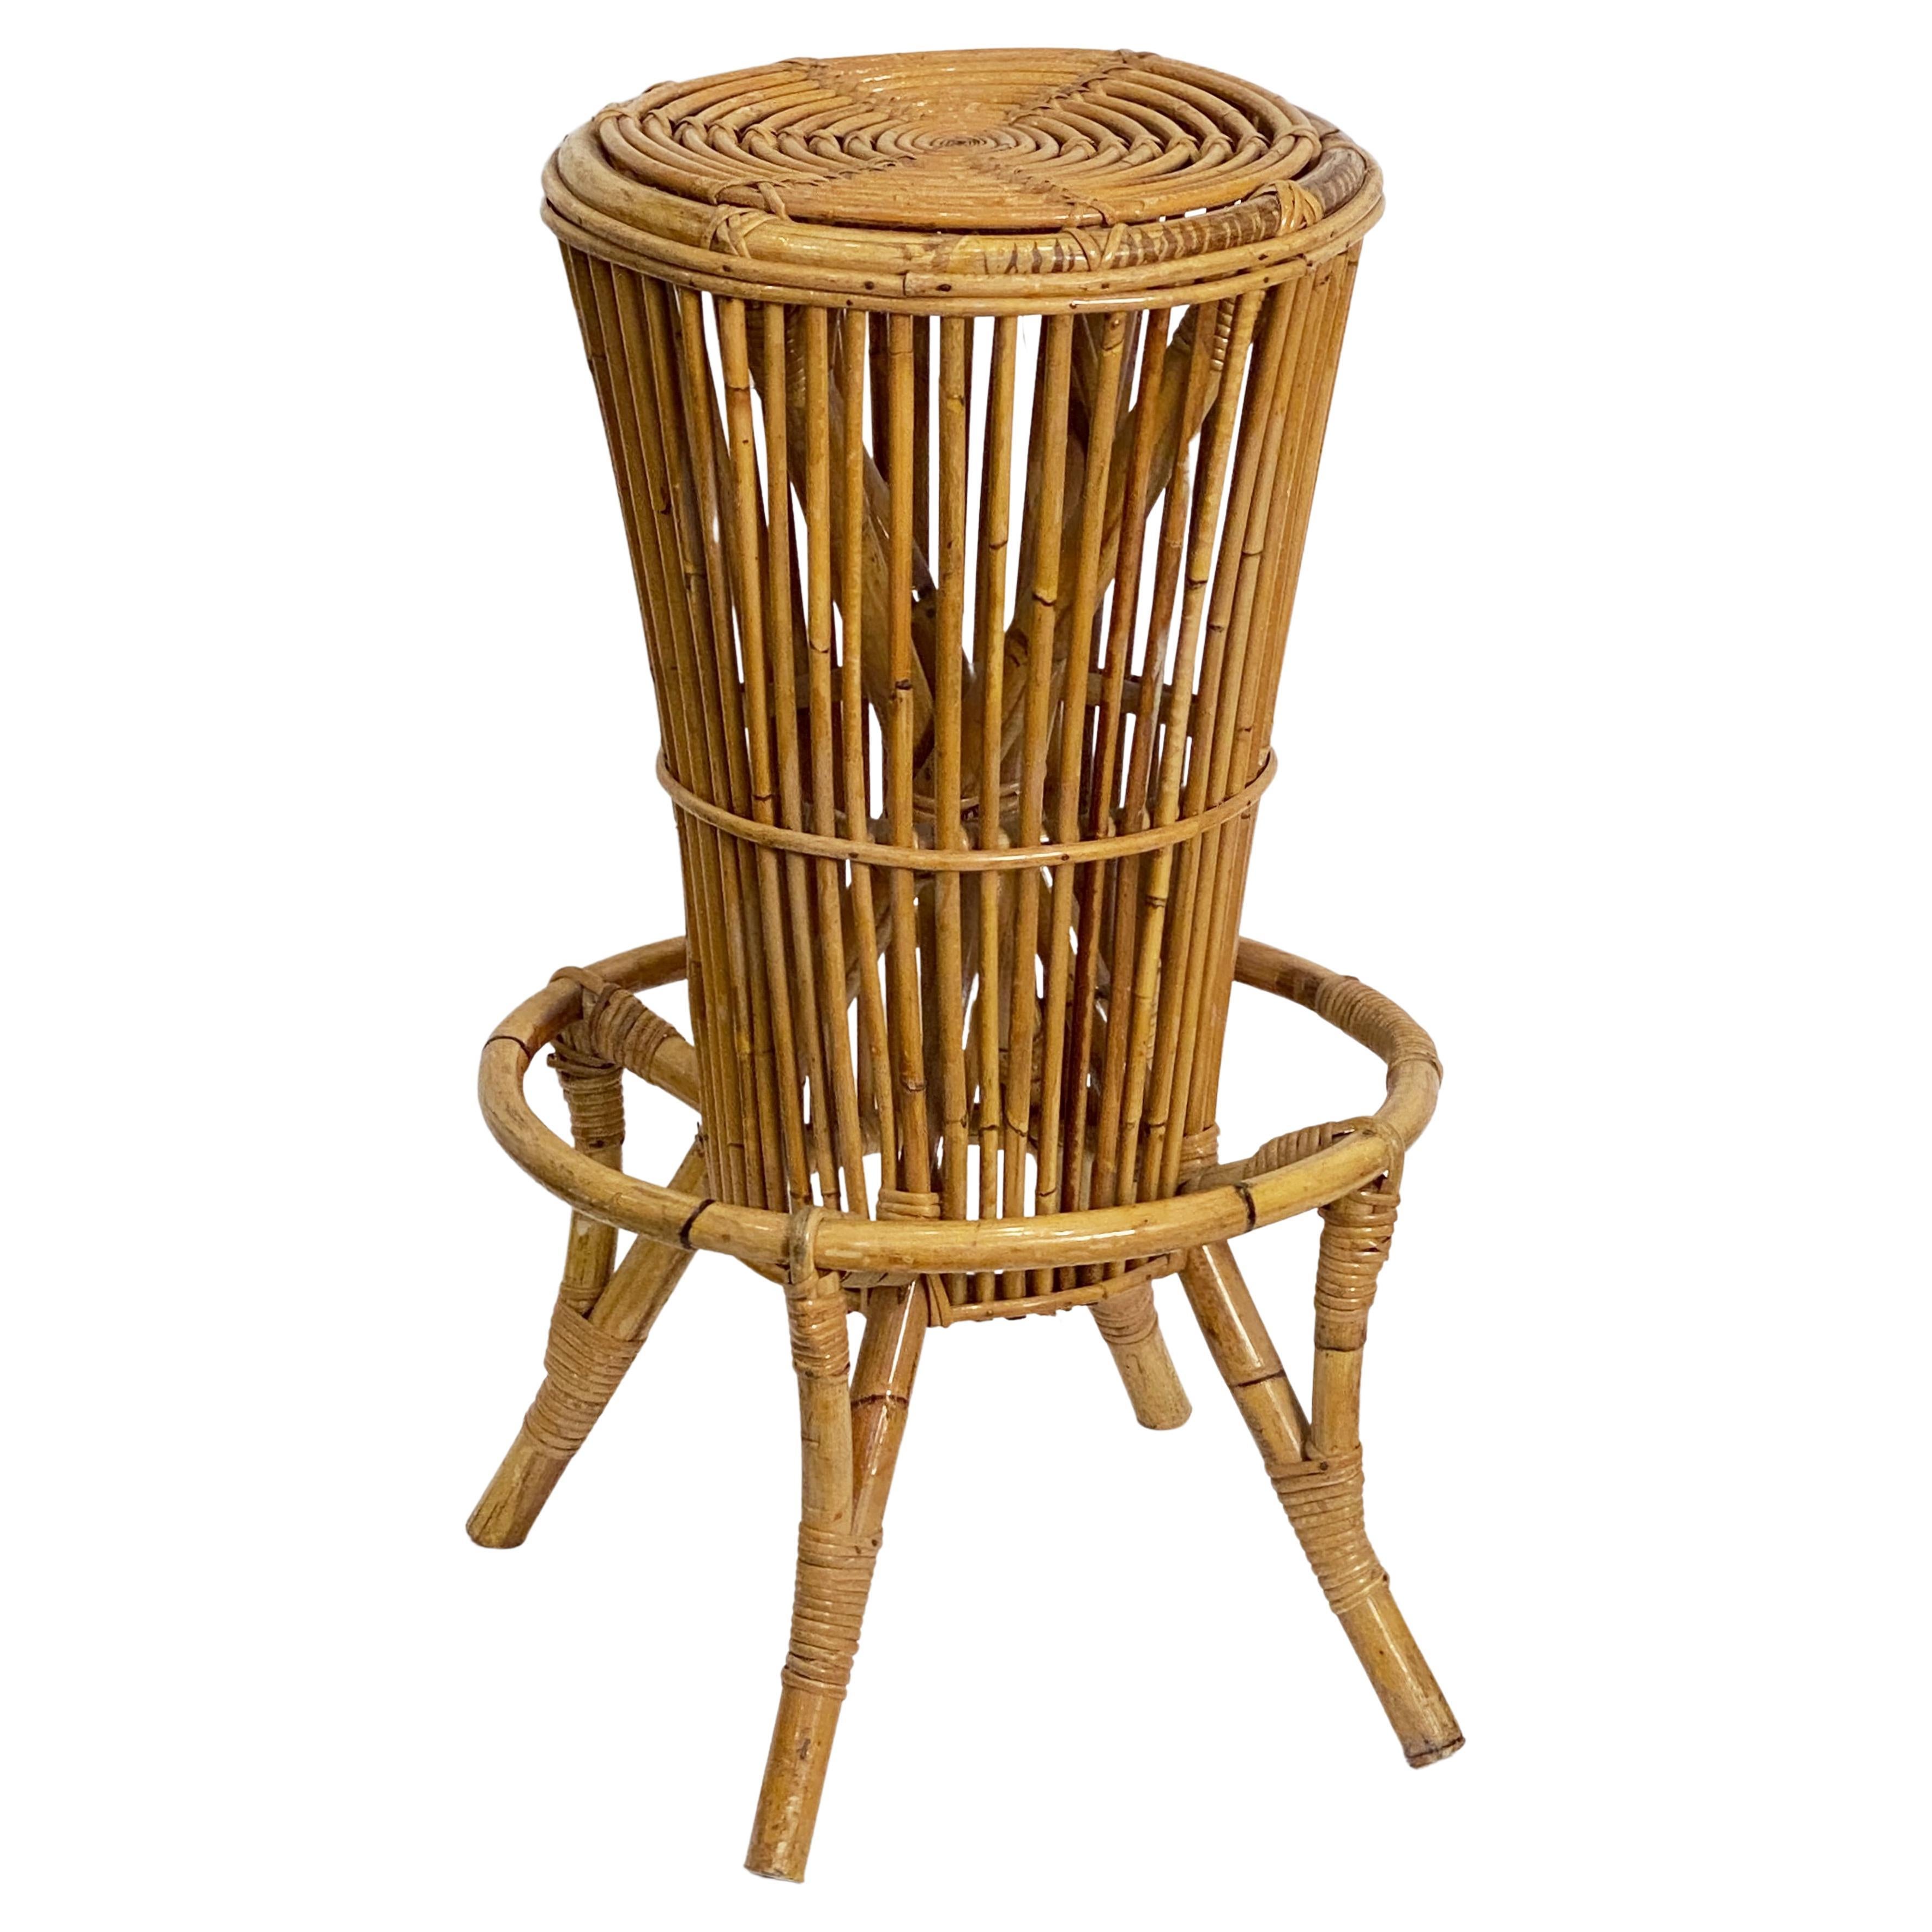 Italian Stool of Rattan and Bamboo from the Mid-20th Century